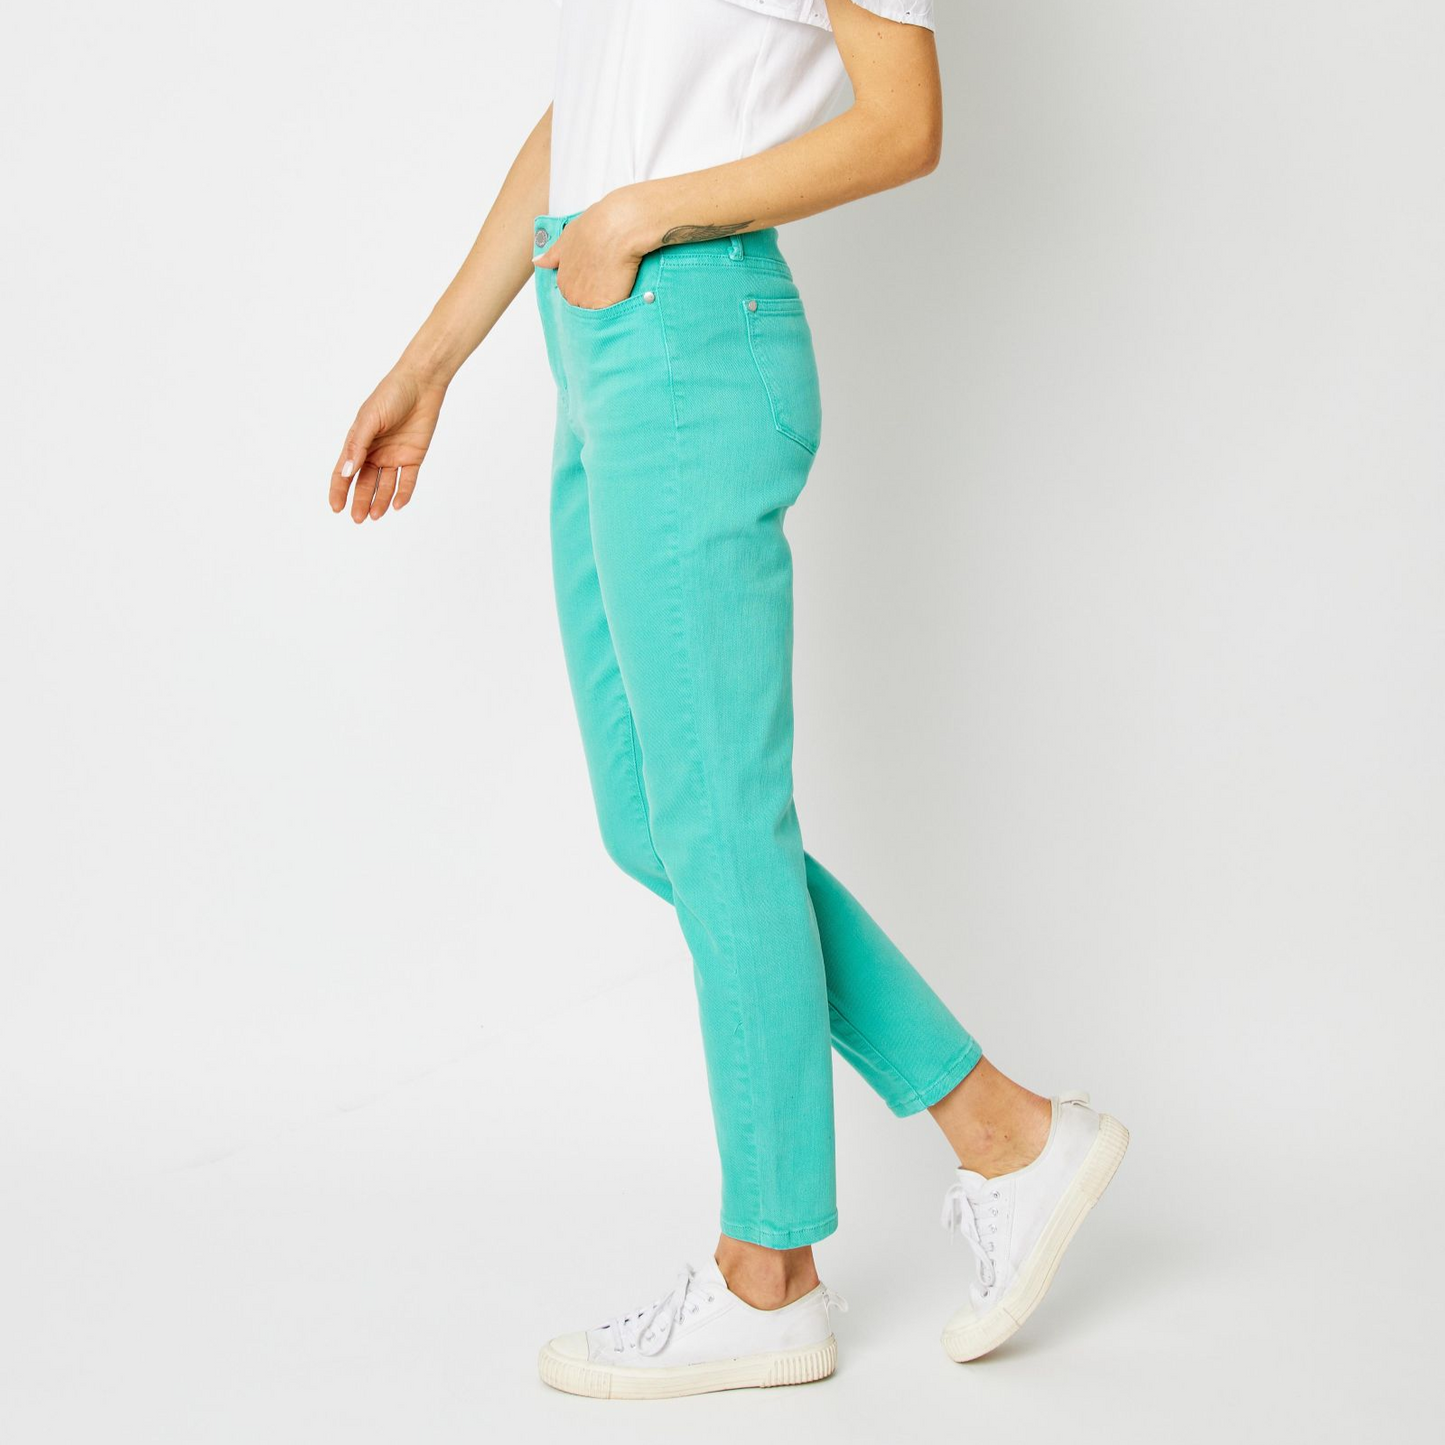 High Waisted Garment Dyed Slim Jeans